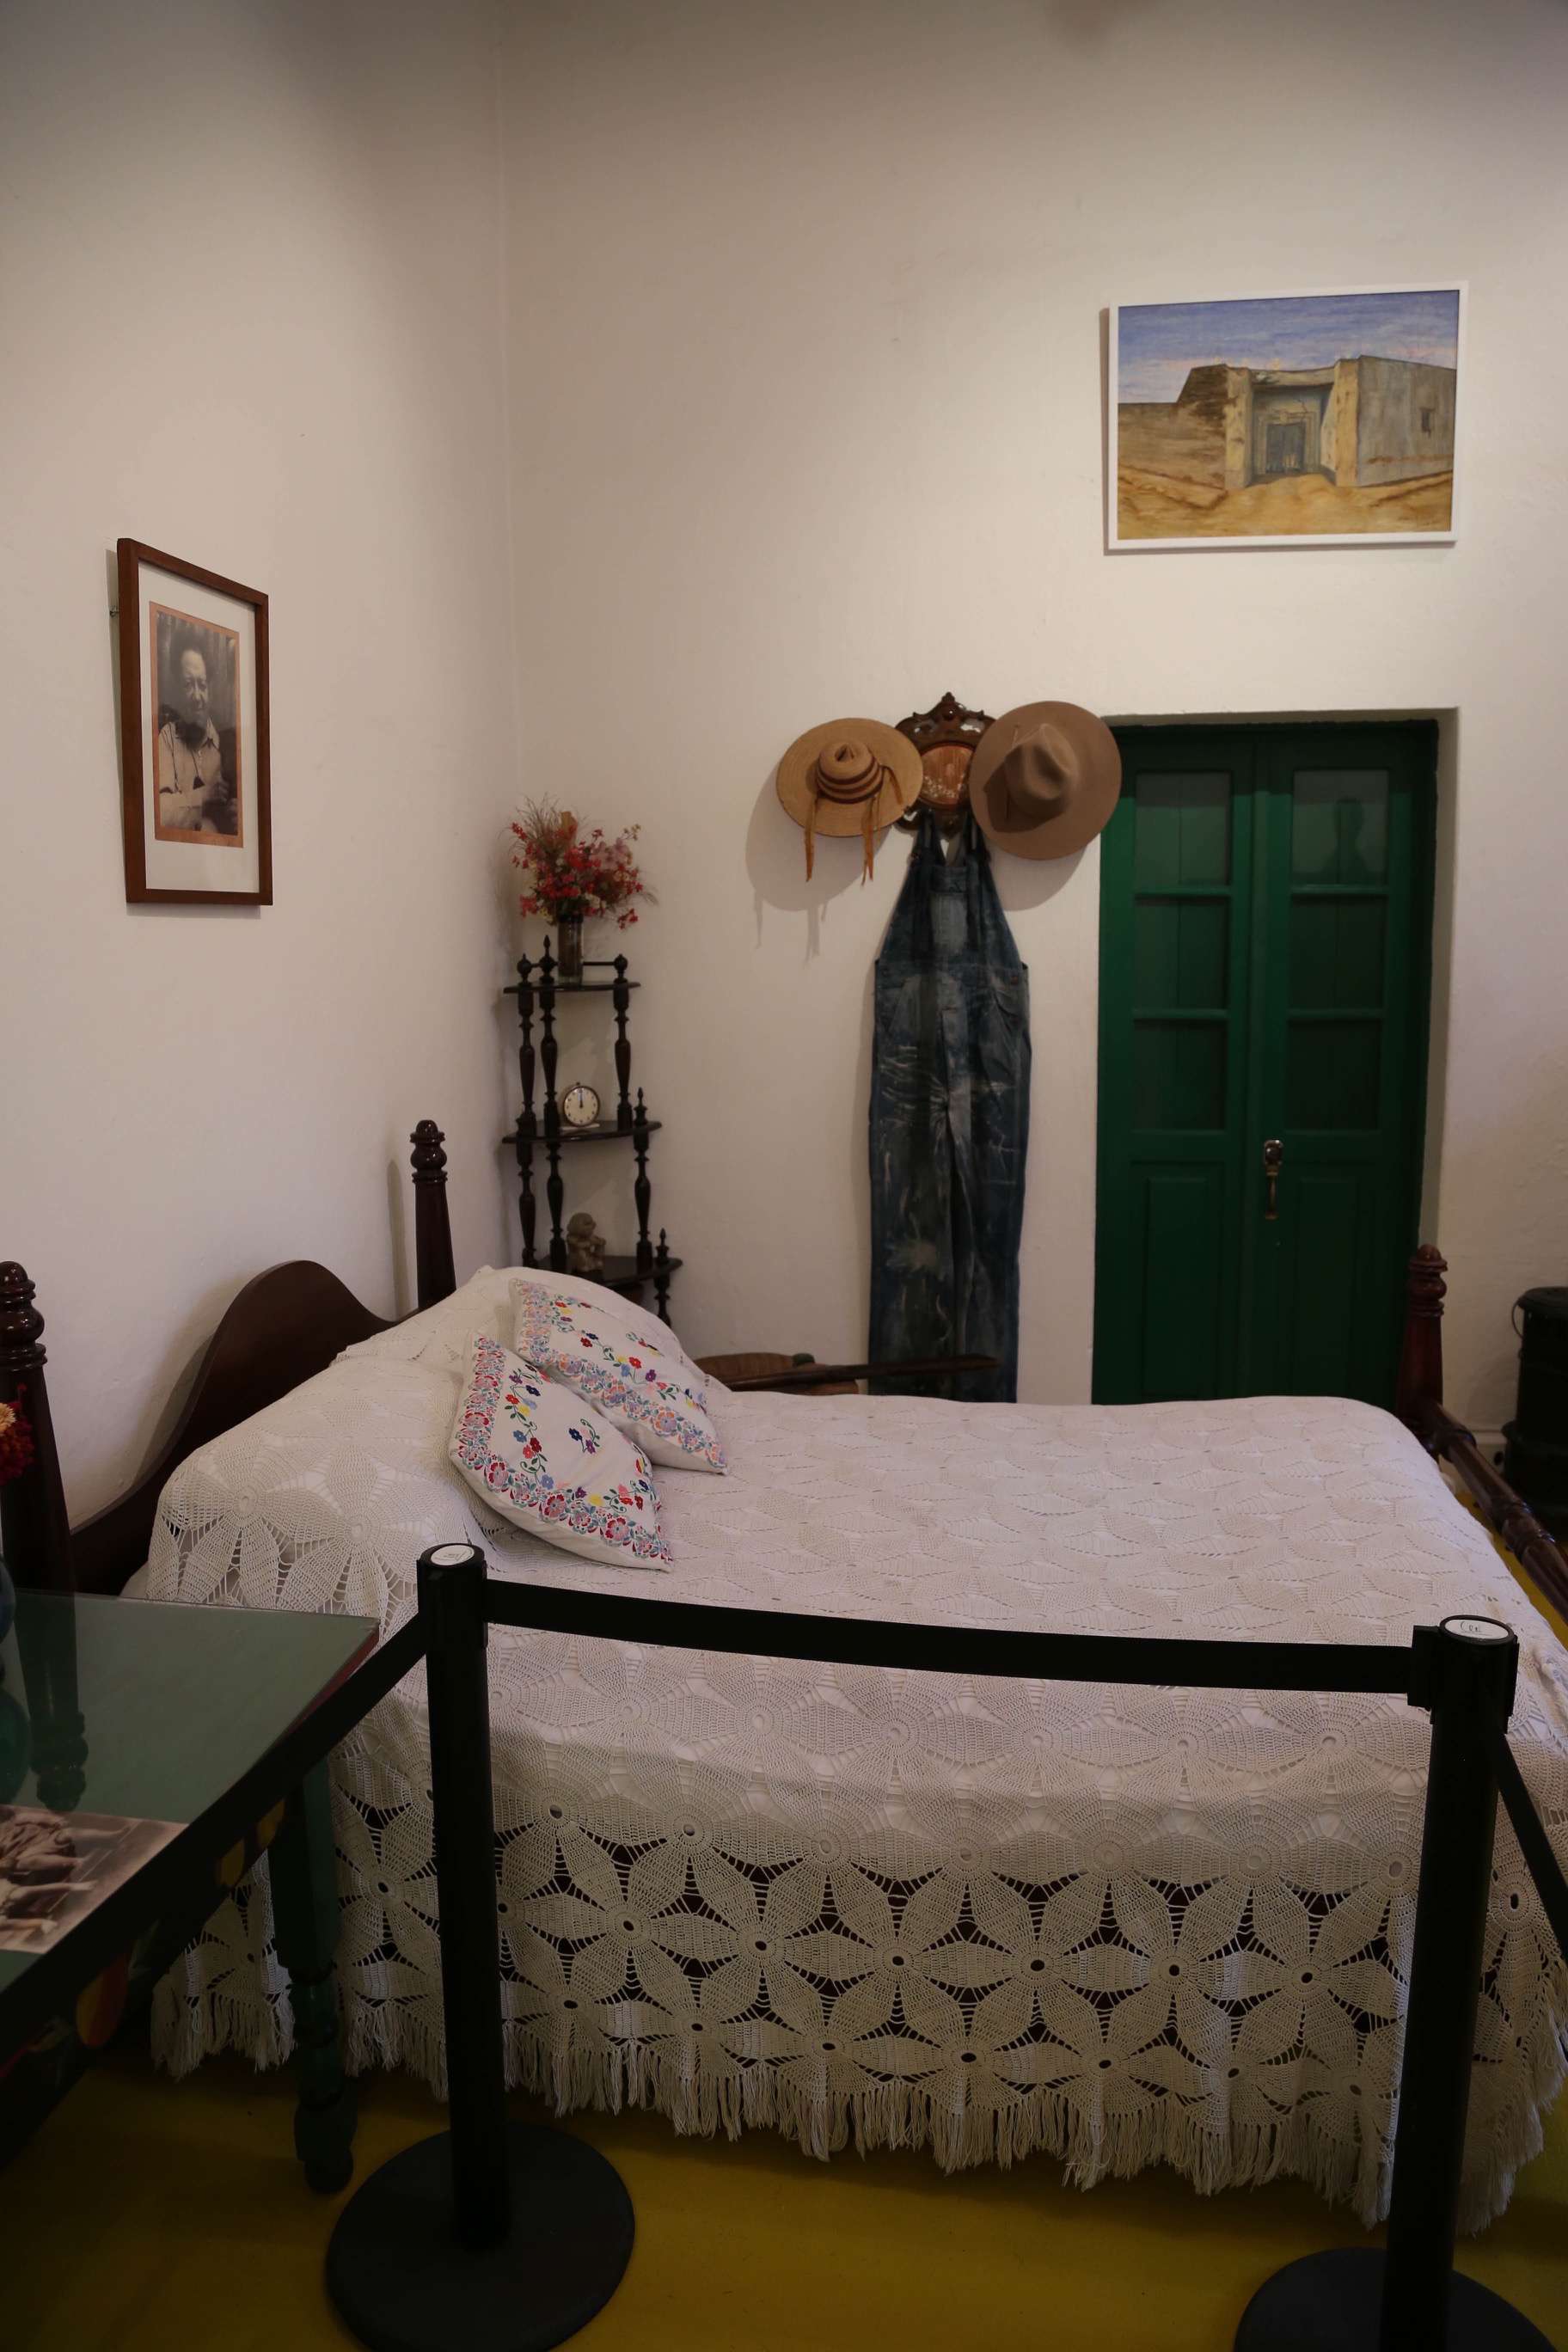 While living at Casa Azul, Leon Trotsky slept in the bed in this room.